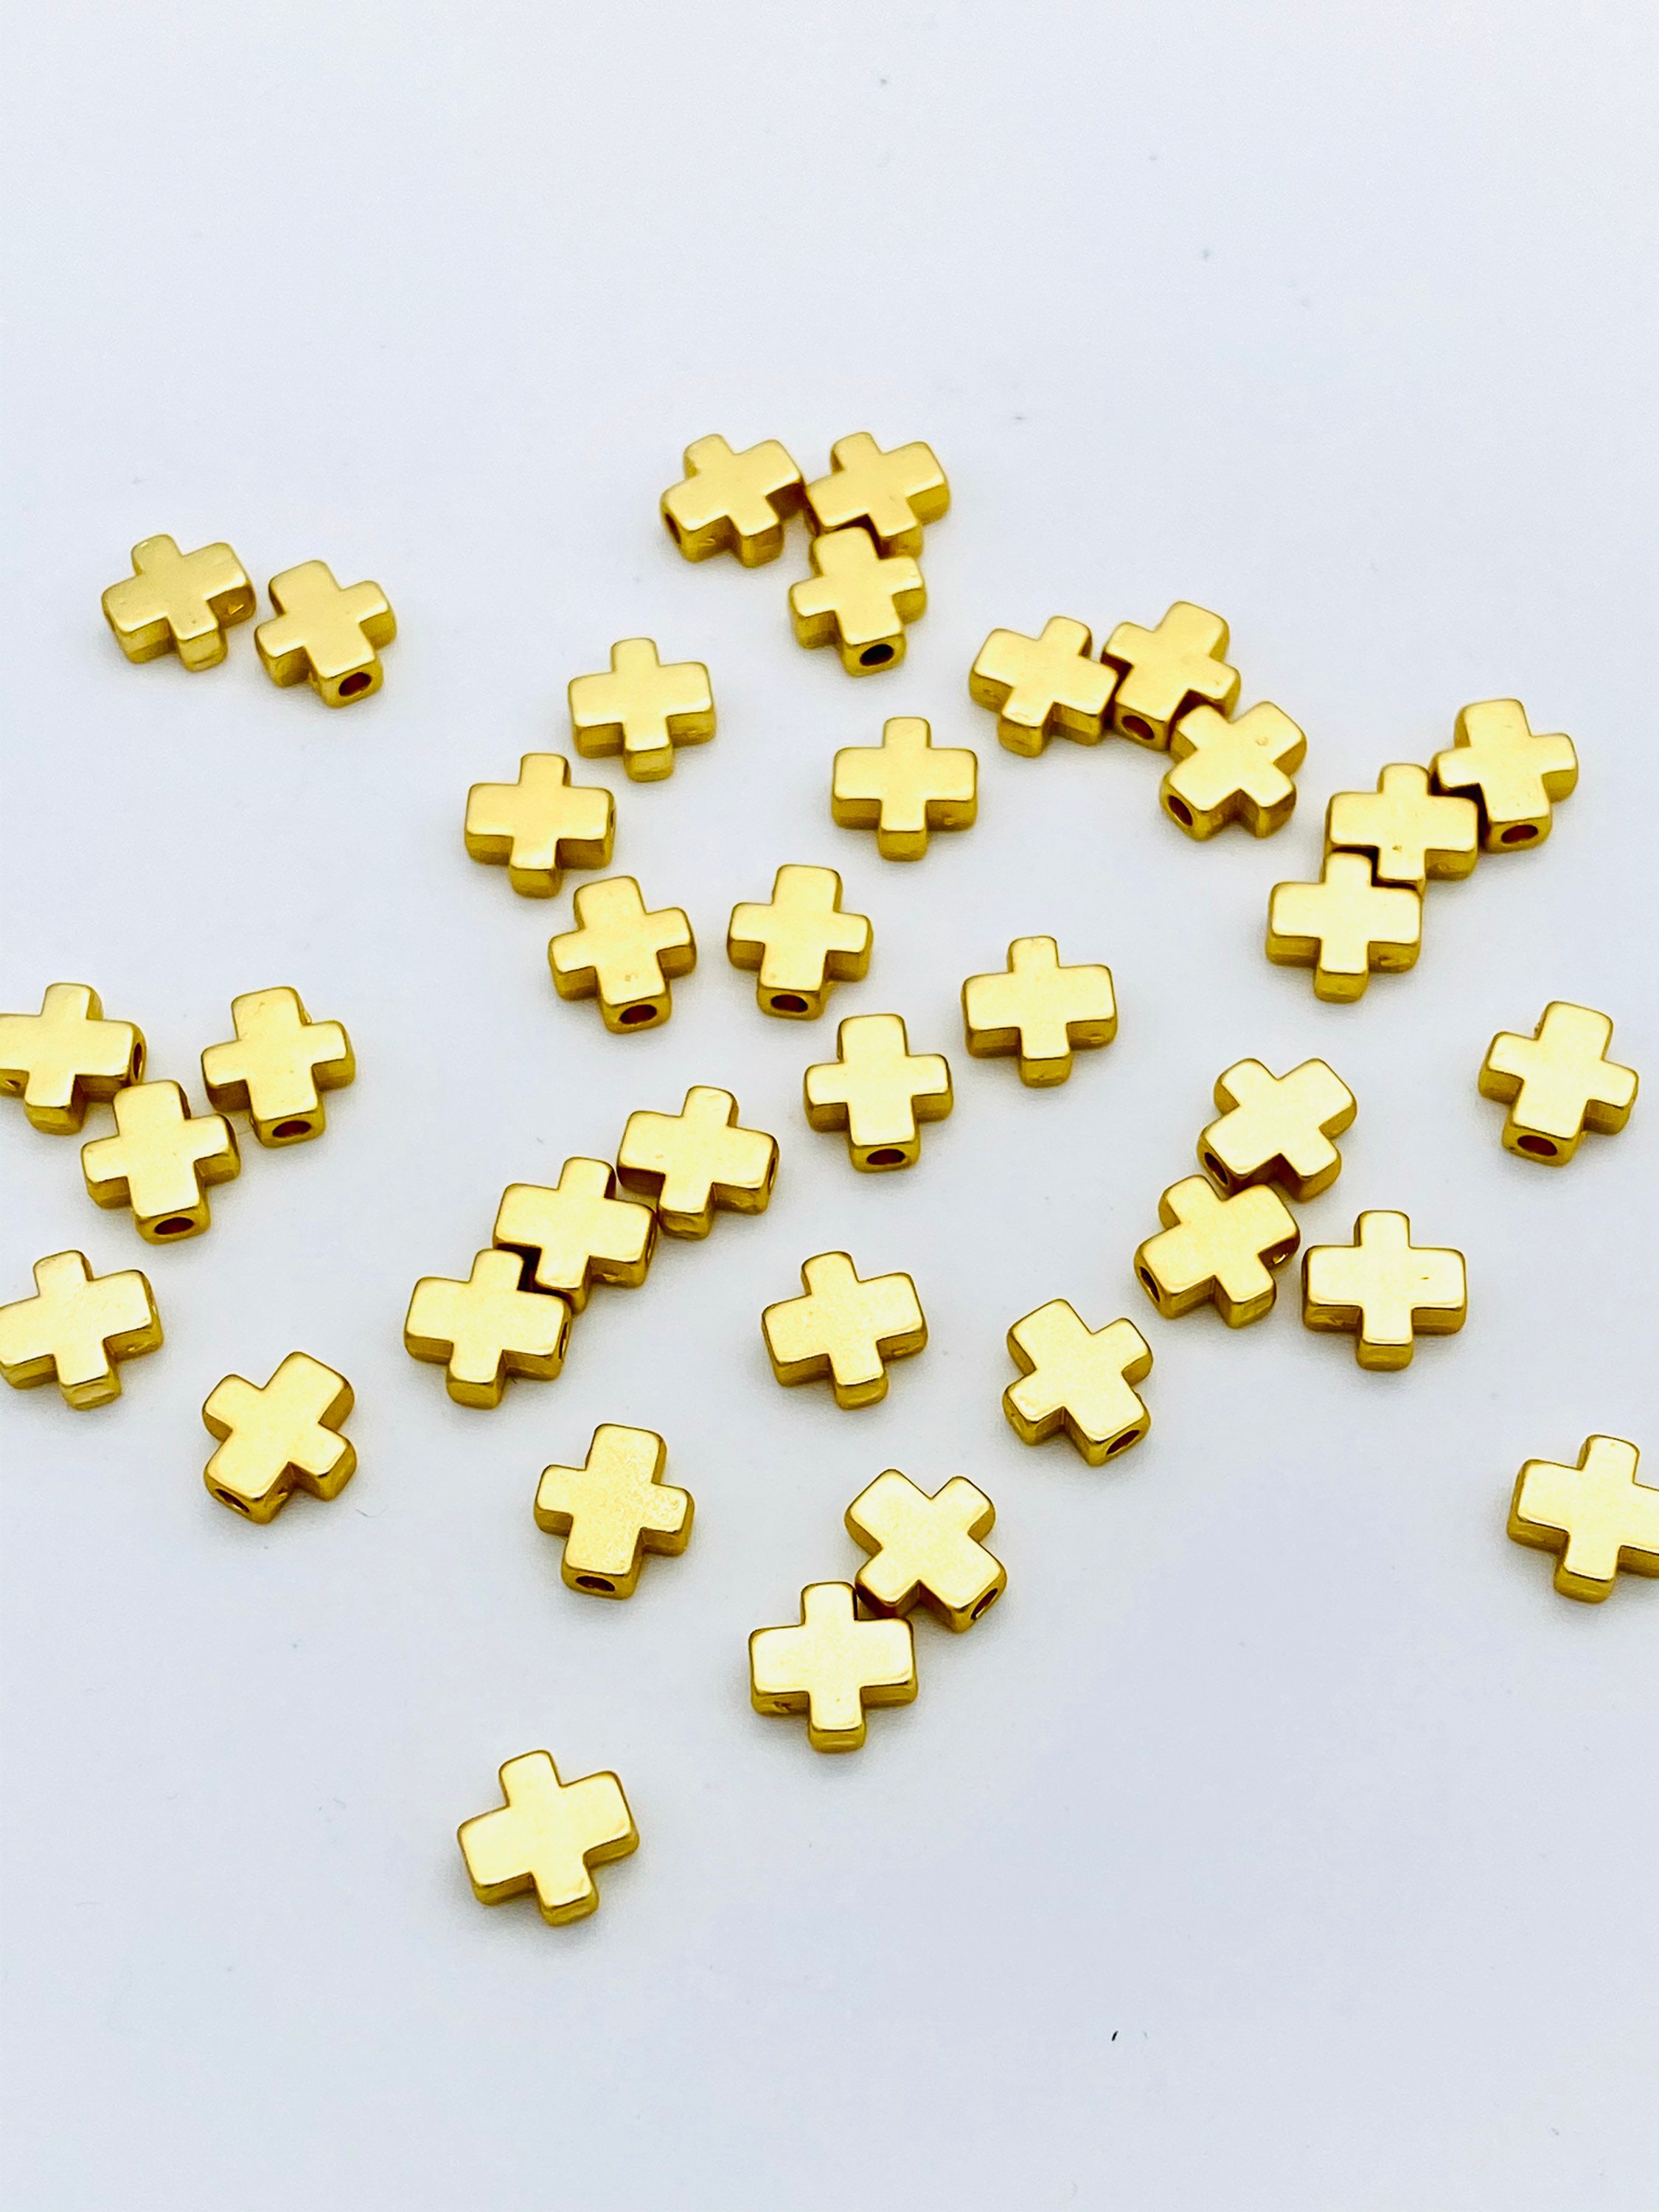  100 Pcs Gold Cross Spacer Beads Crucifix Gold Plated Spacer  Beads Small Antique Metal Cross Beads for DIY Craft Jewelry Making Findings  Handmade Bracelets Accessories, 8 x 8 x 3 mm, 1.5 mm Hole